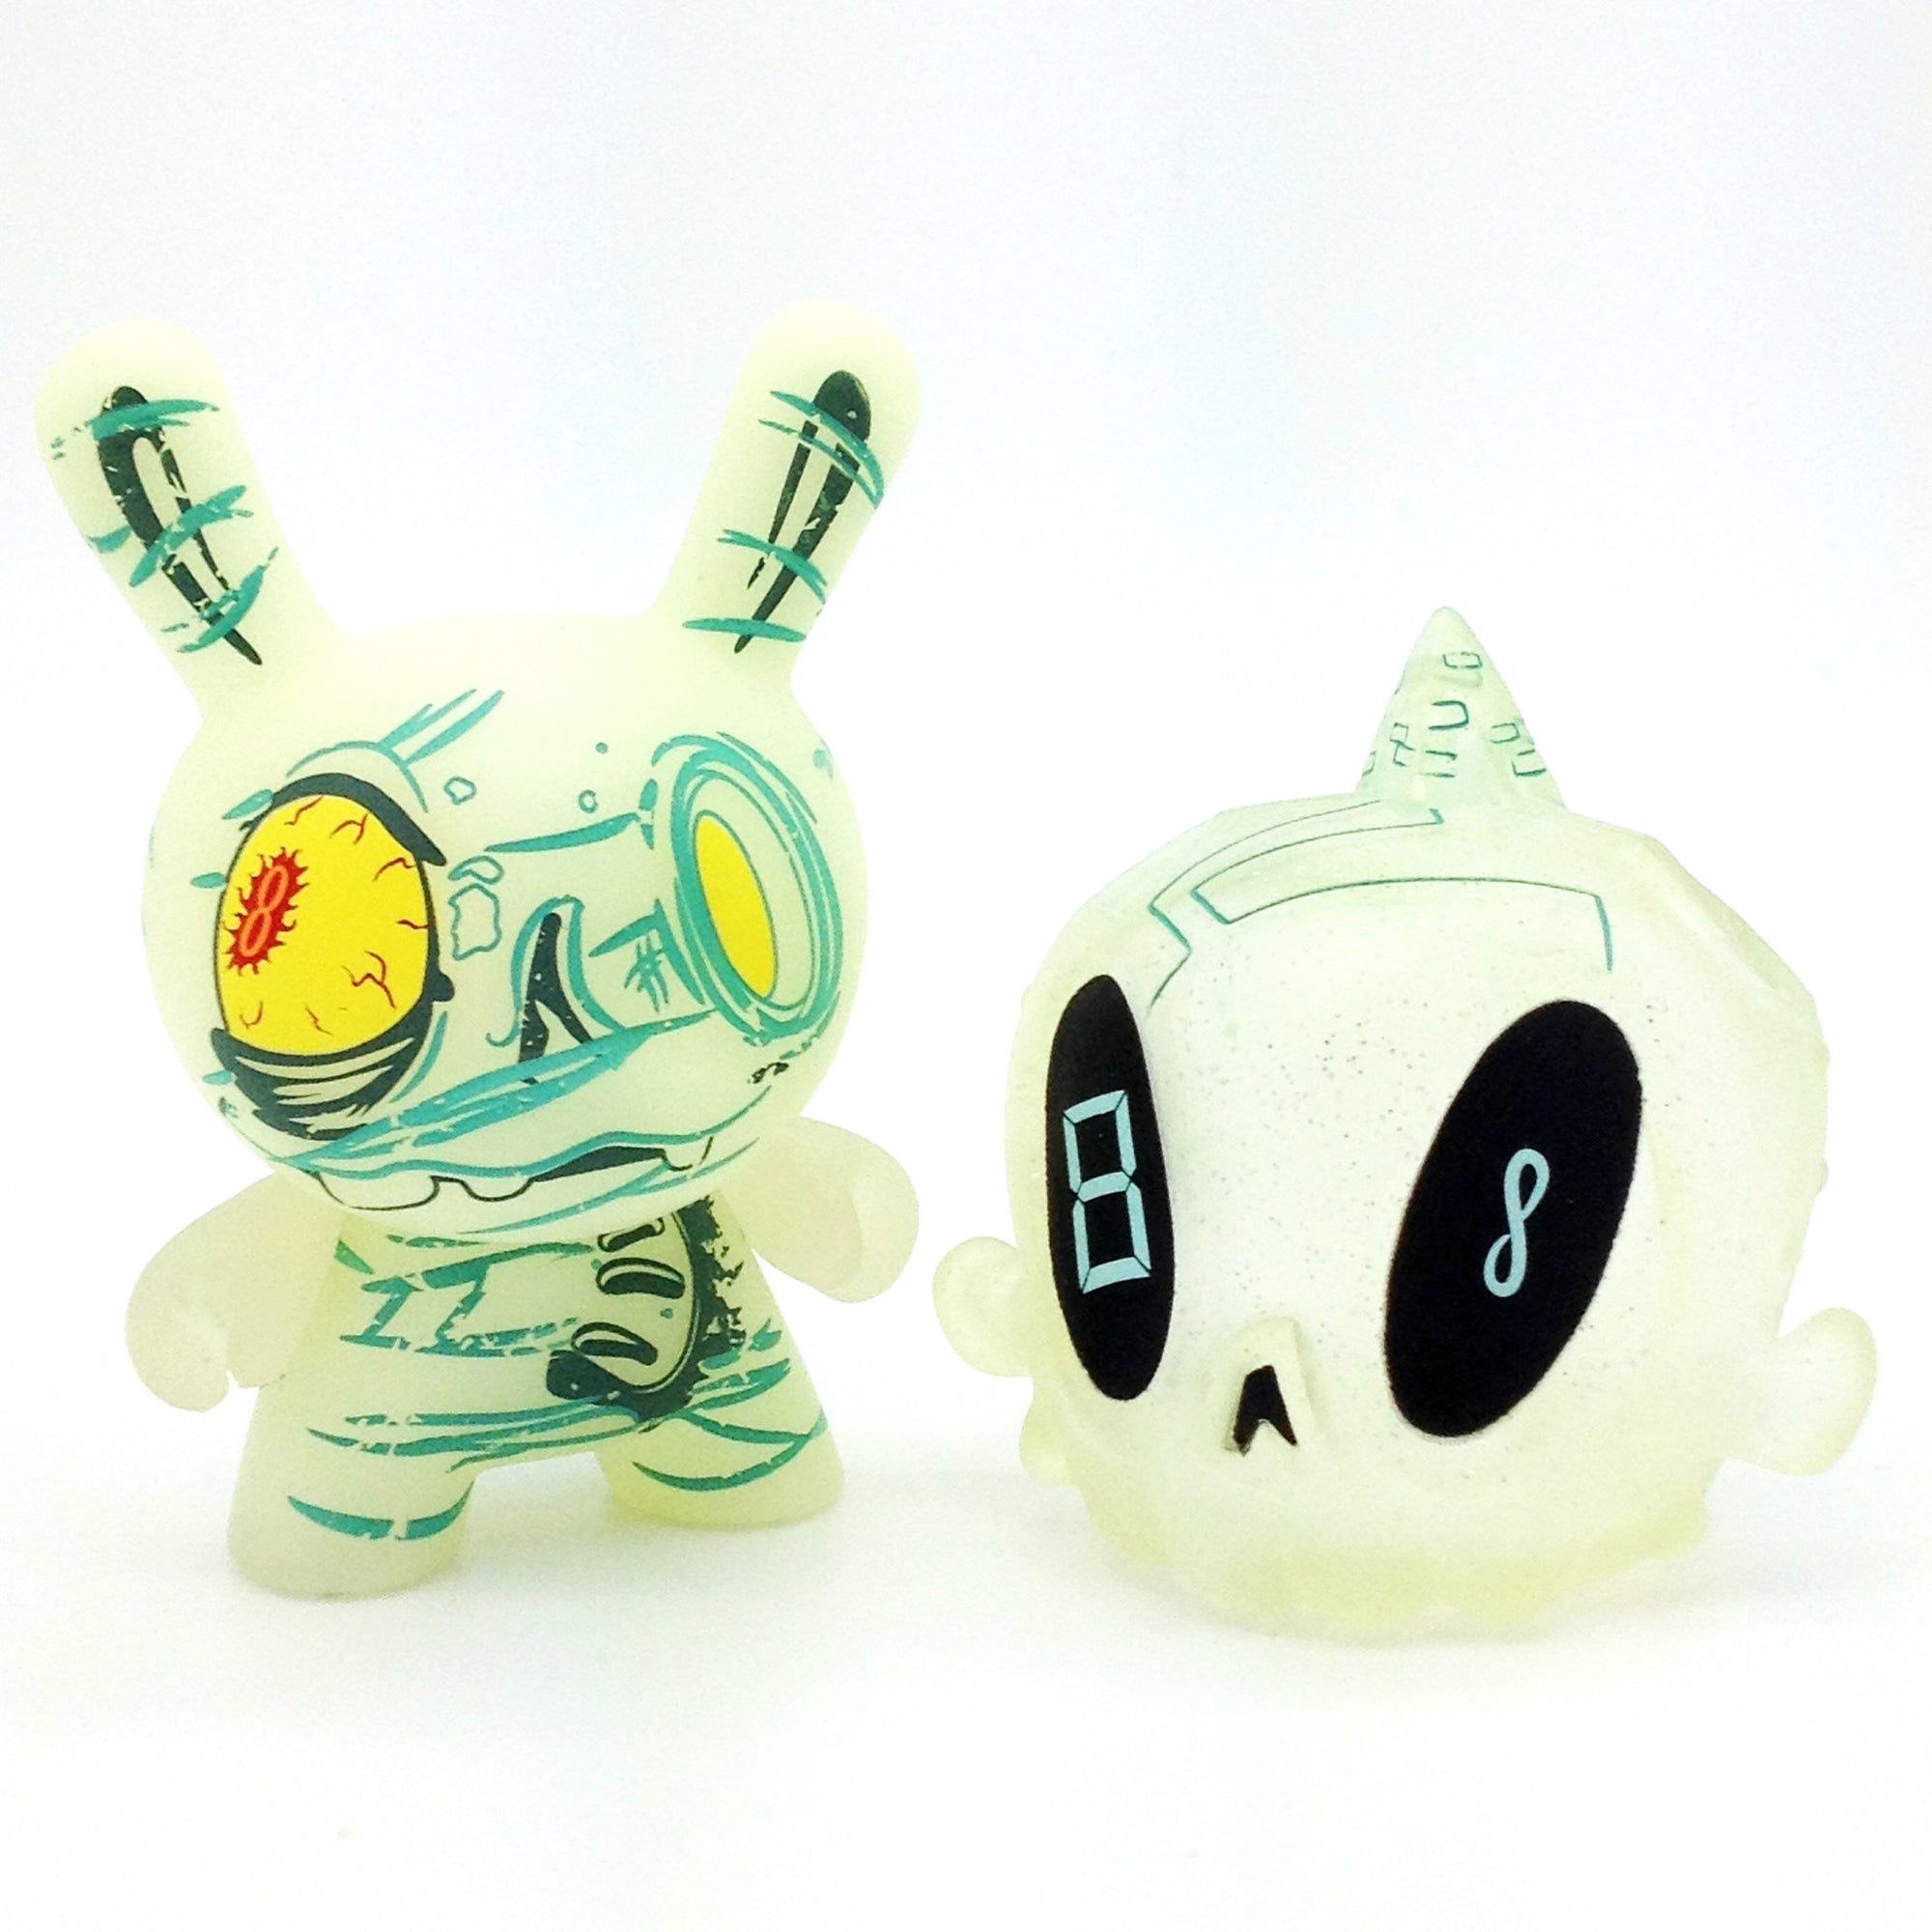 The 13 Dunny Series - The Ancient One #8 - Mindzai
 - 2